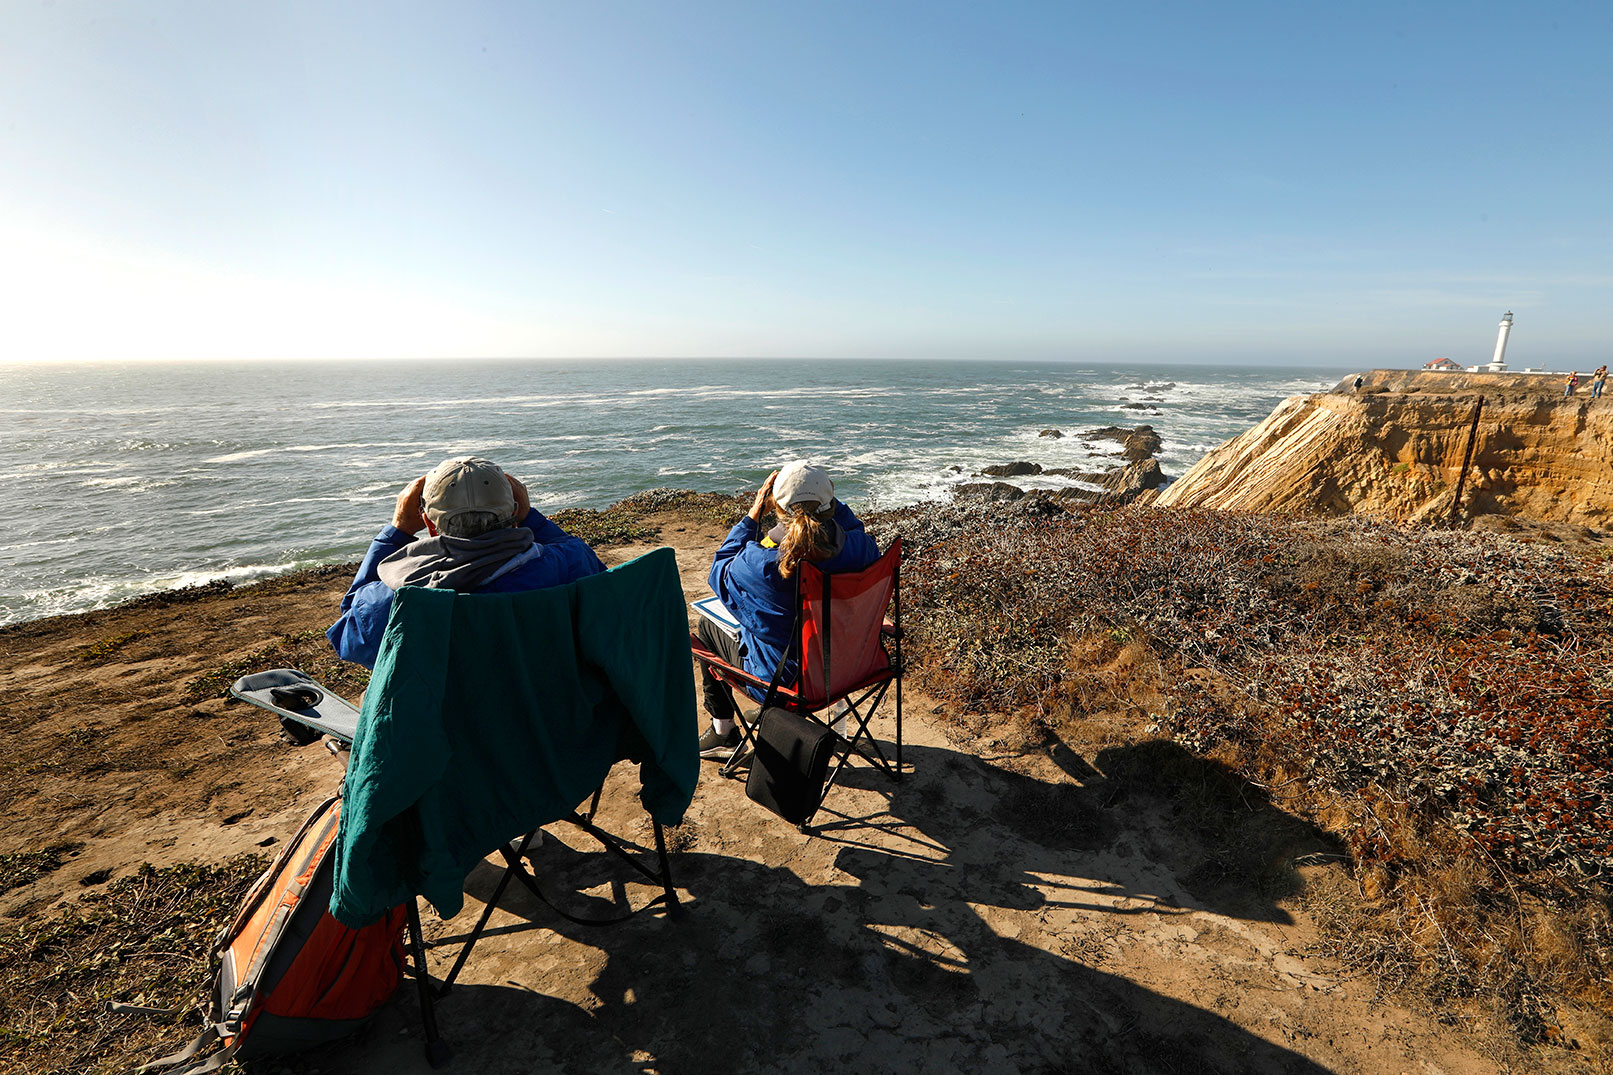 Scott Mercer, left, a whale biologist in New England, relocated to the Pacific Coast with his wife, Tree Mercer, right. During the pandemic, they spent nearly every day monitoring whales and recording data from a bluff near Point Arena Lighthouse in Mendocino County.